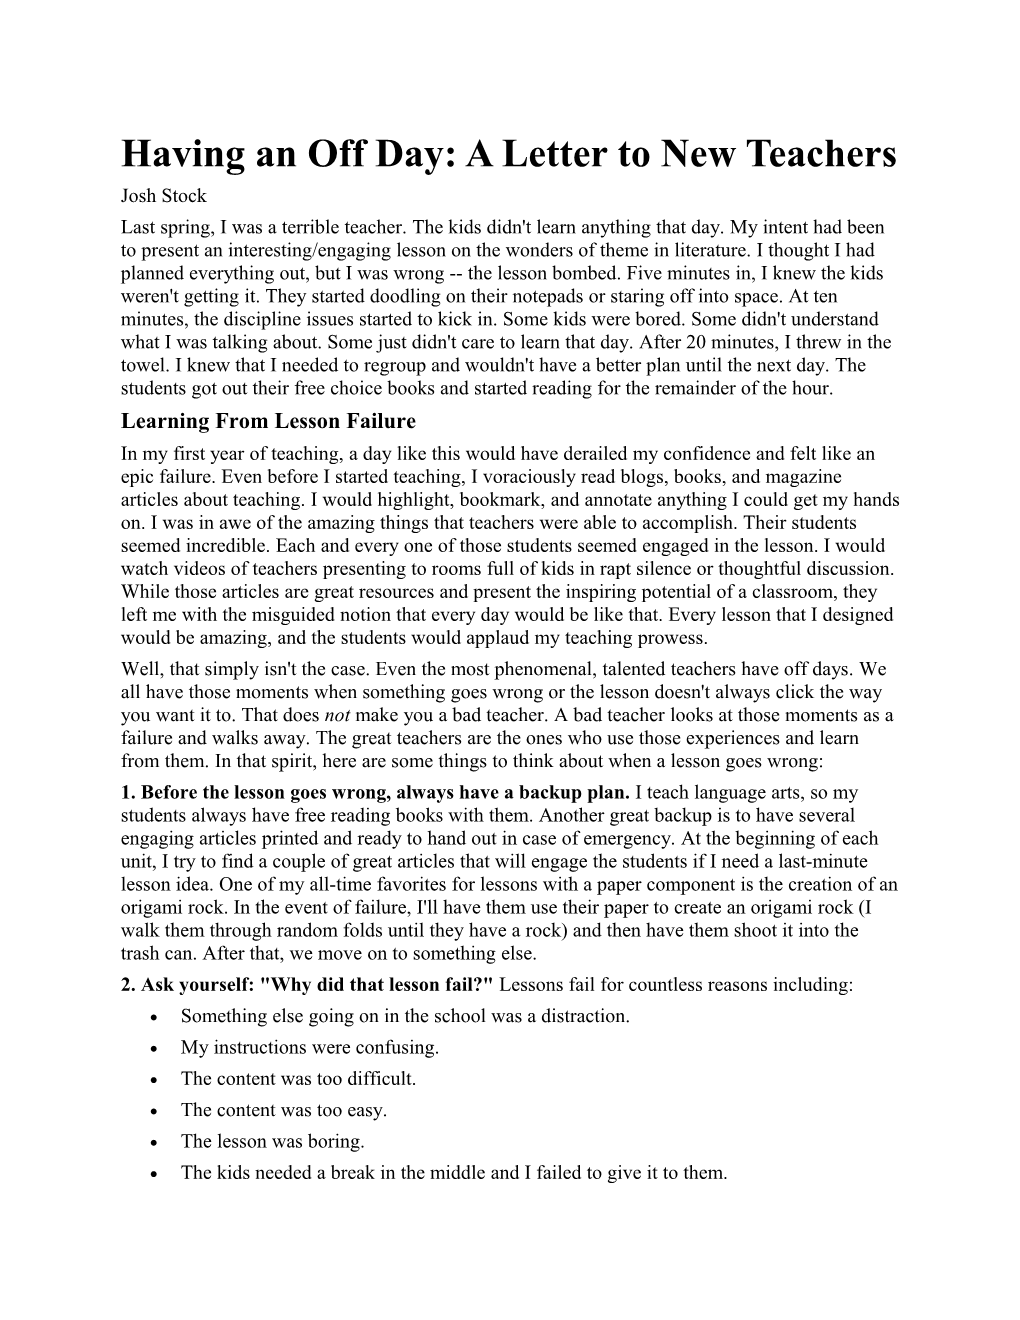 Having an Off Day: a Letter to New Teachers